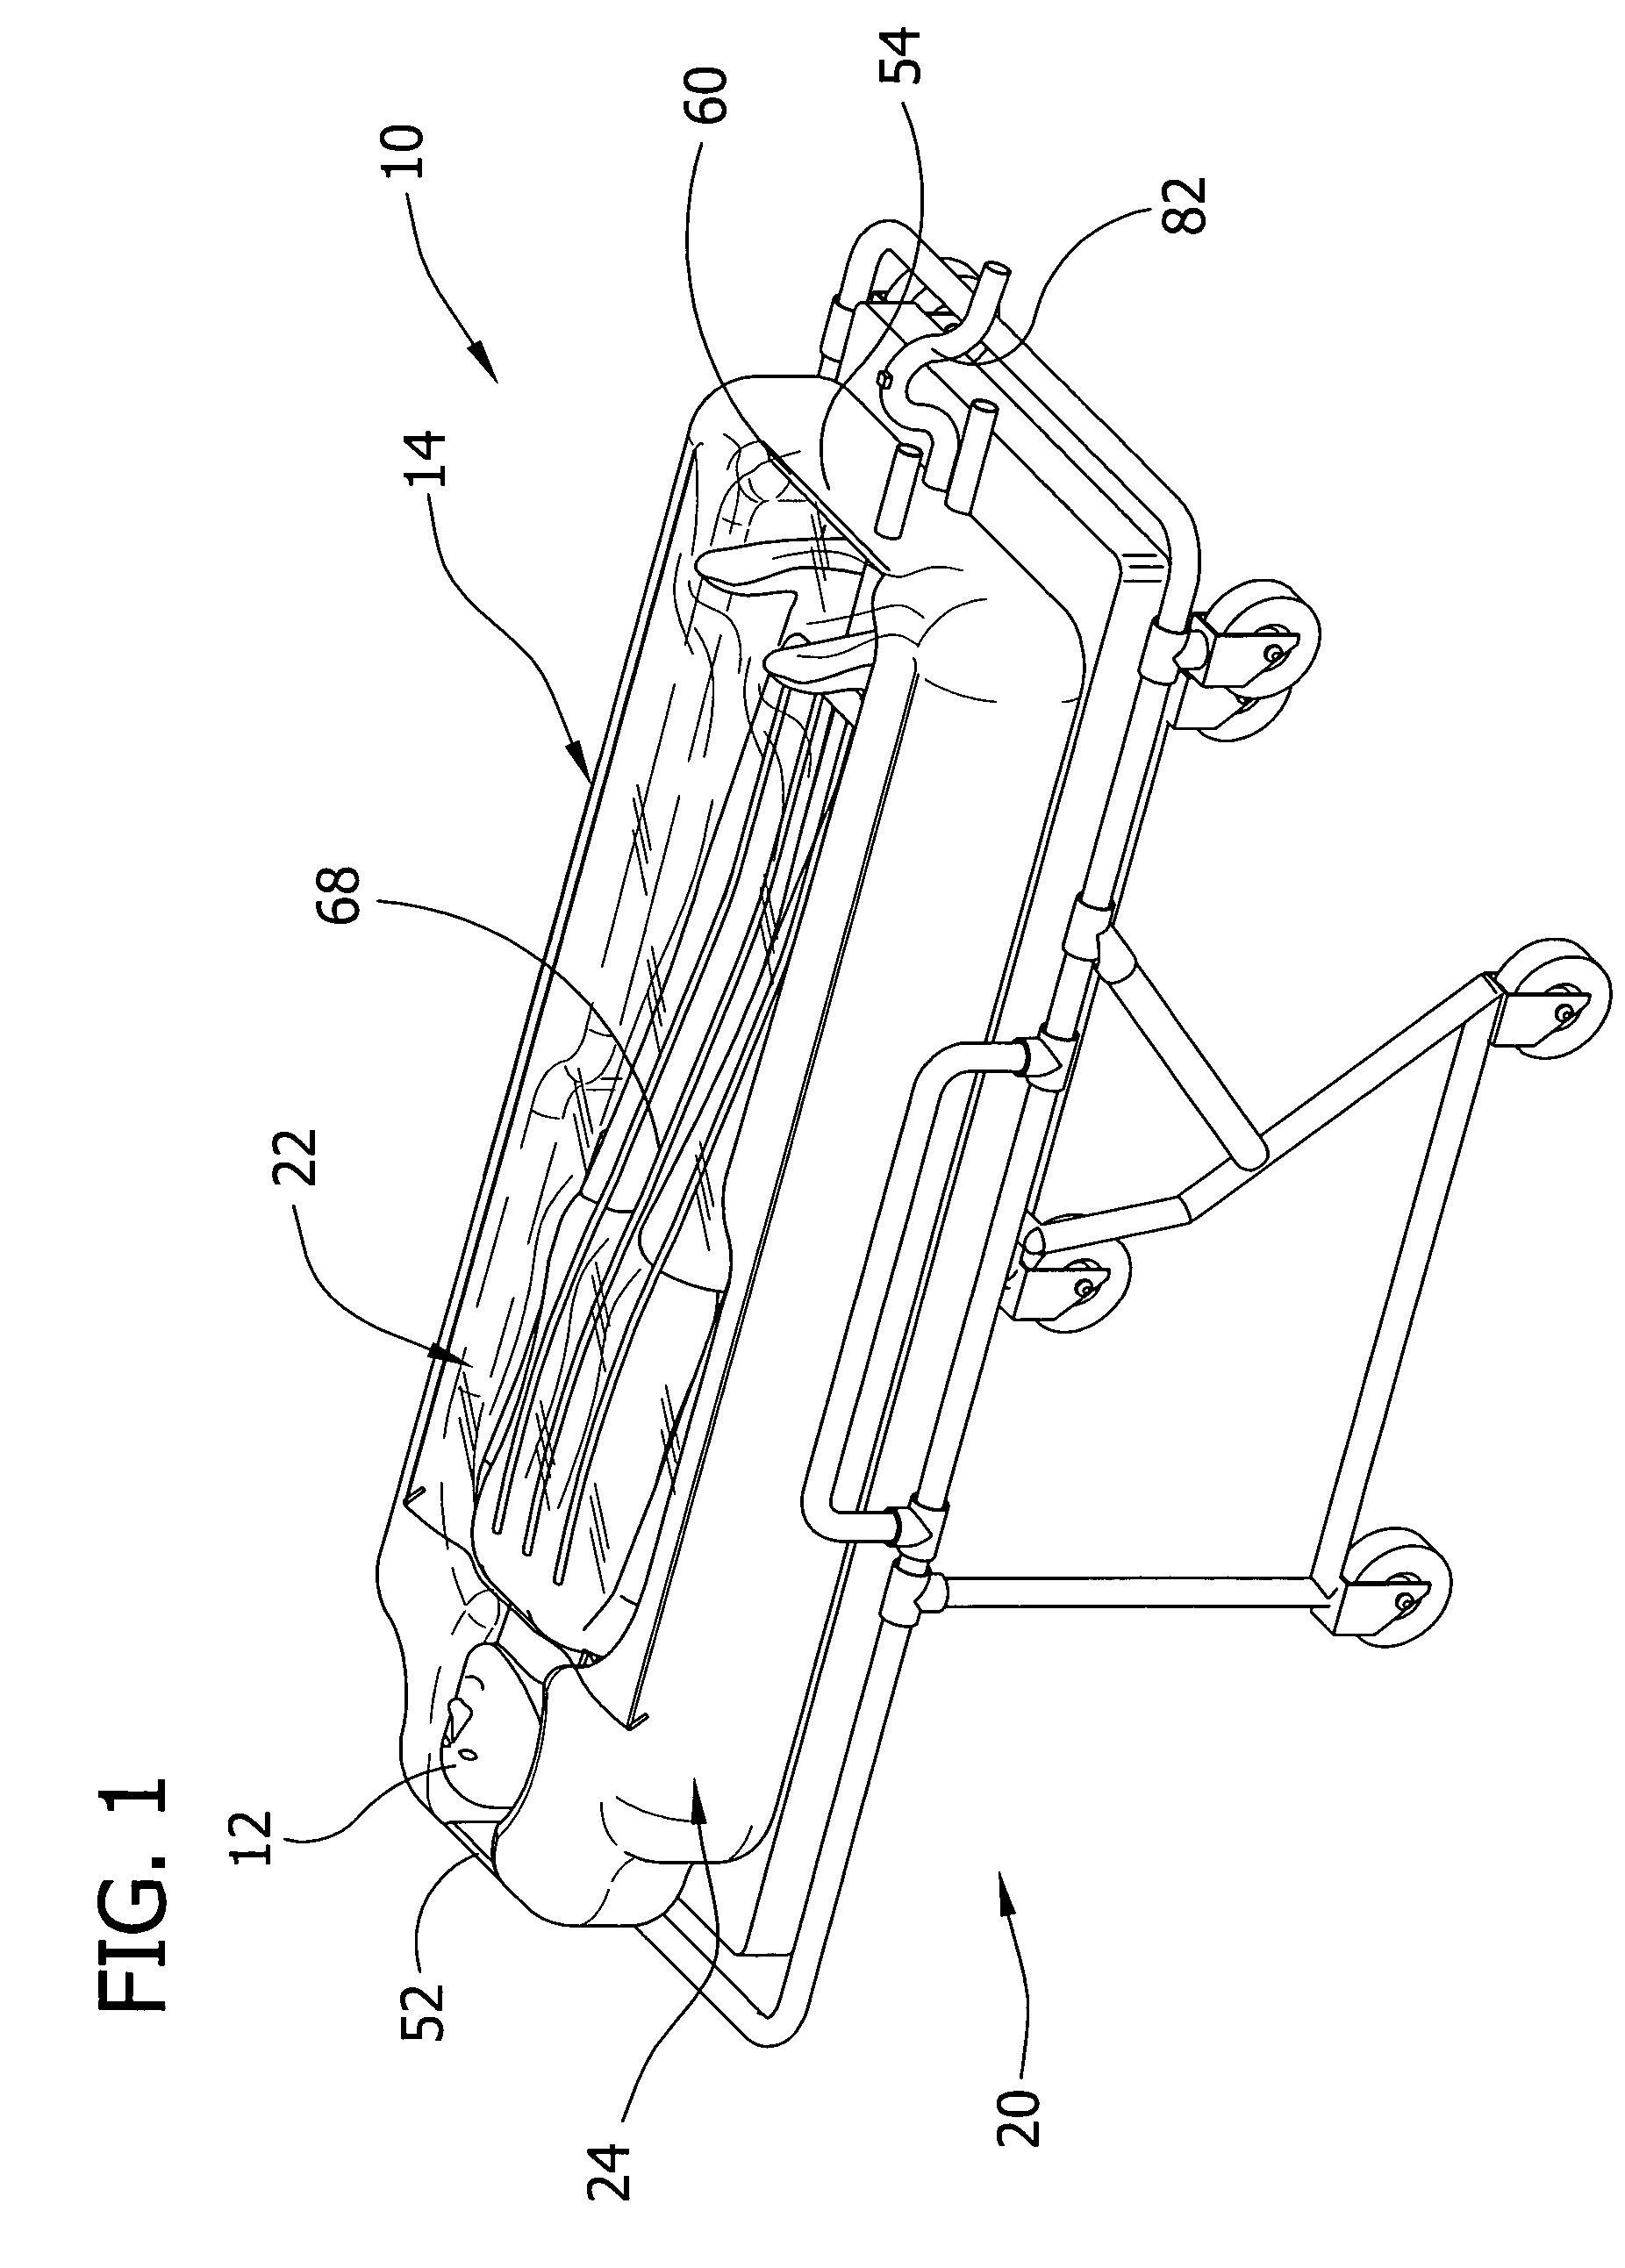 Apparatus for altering the body temperature of a patient